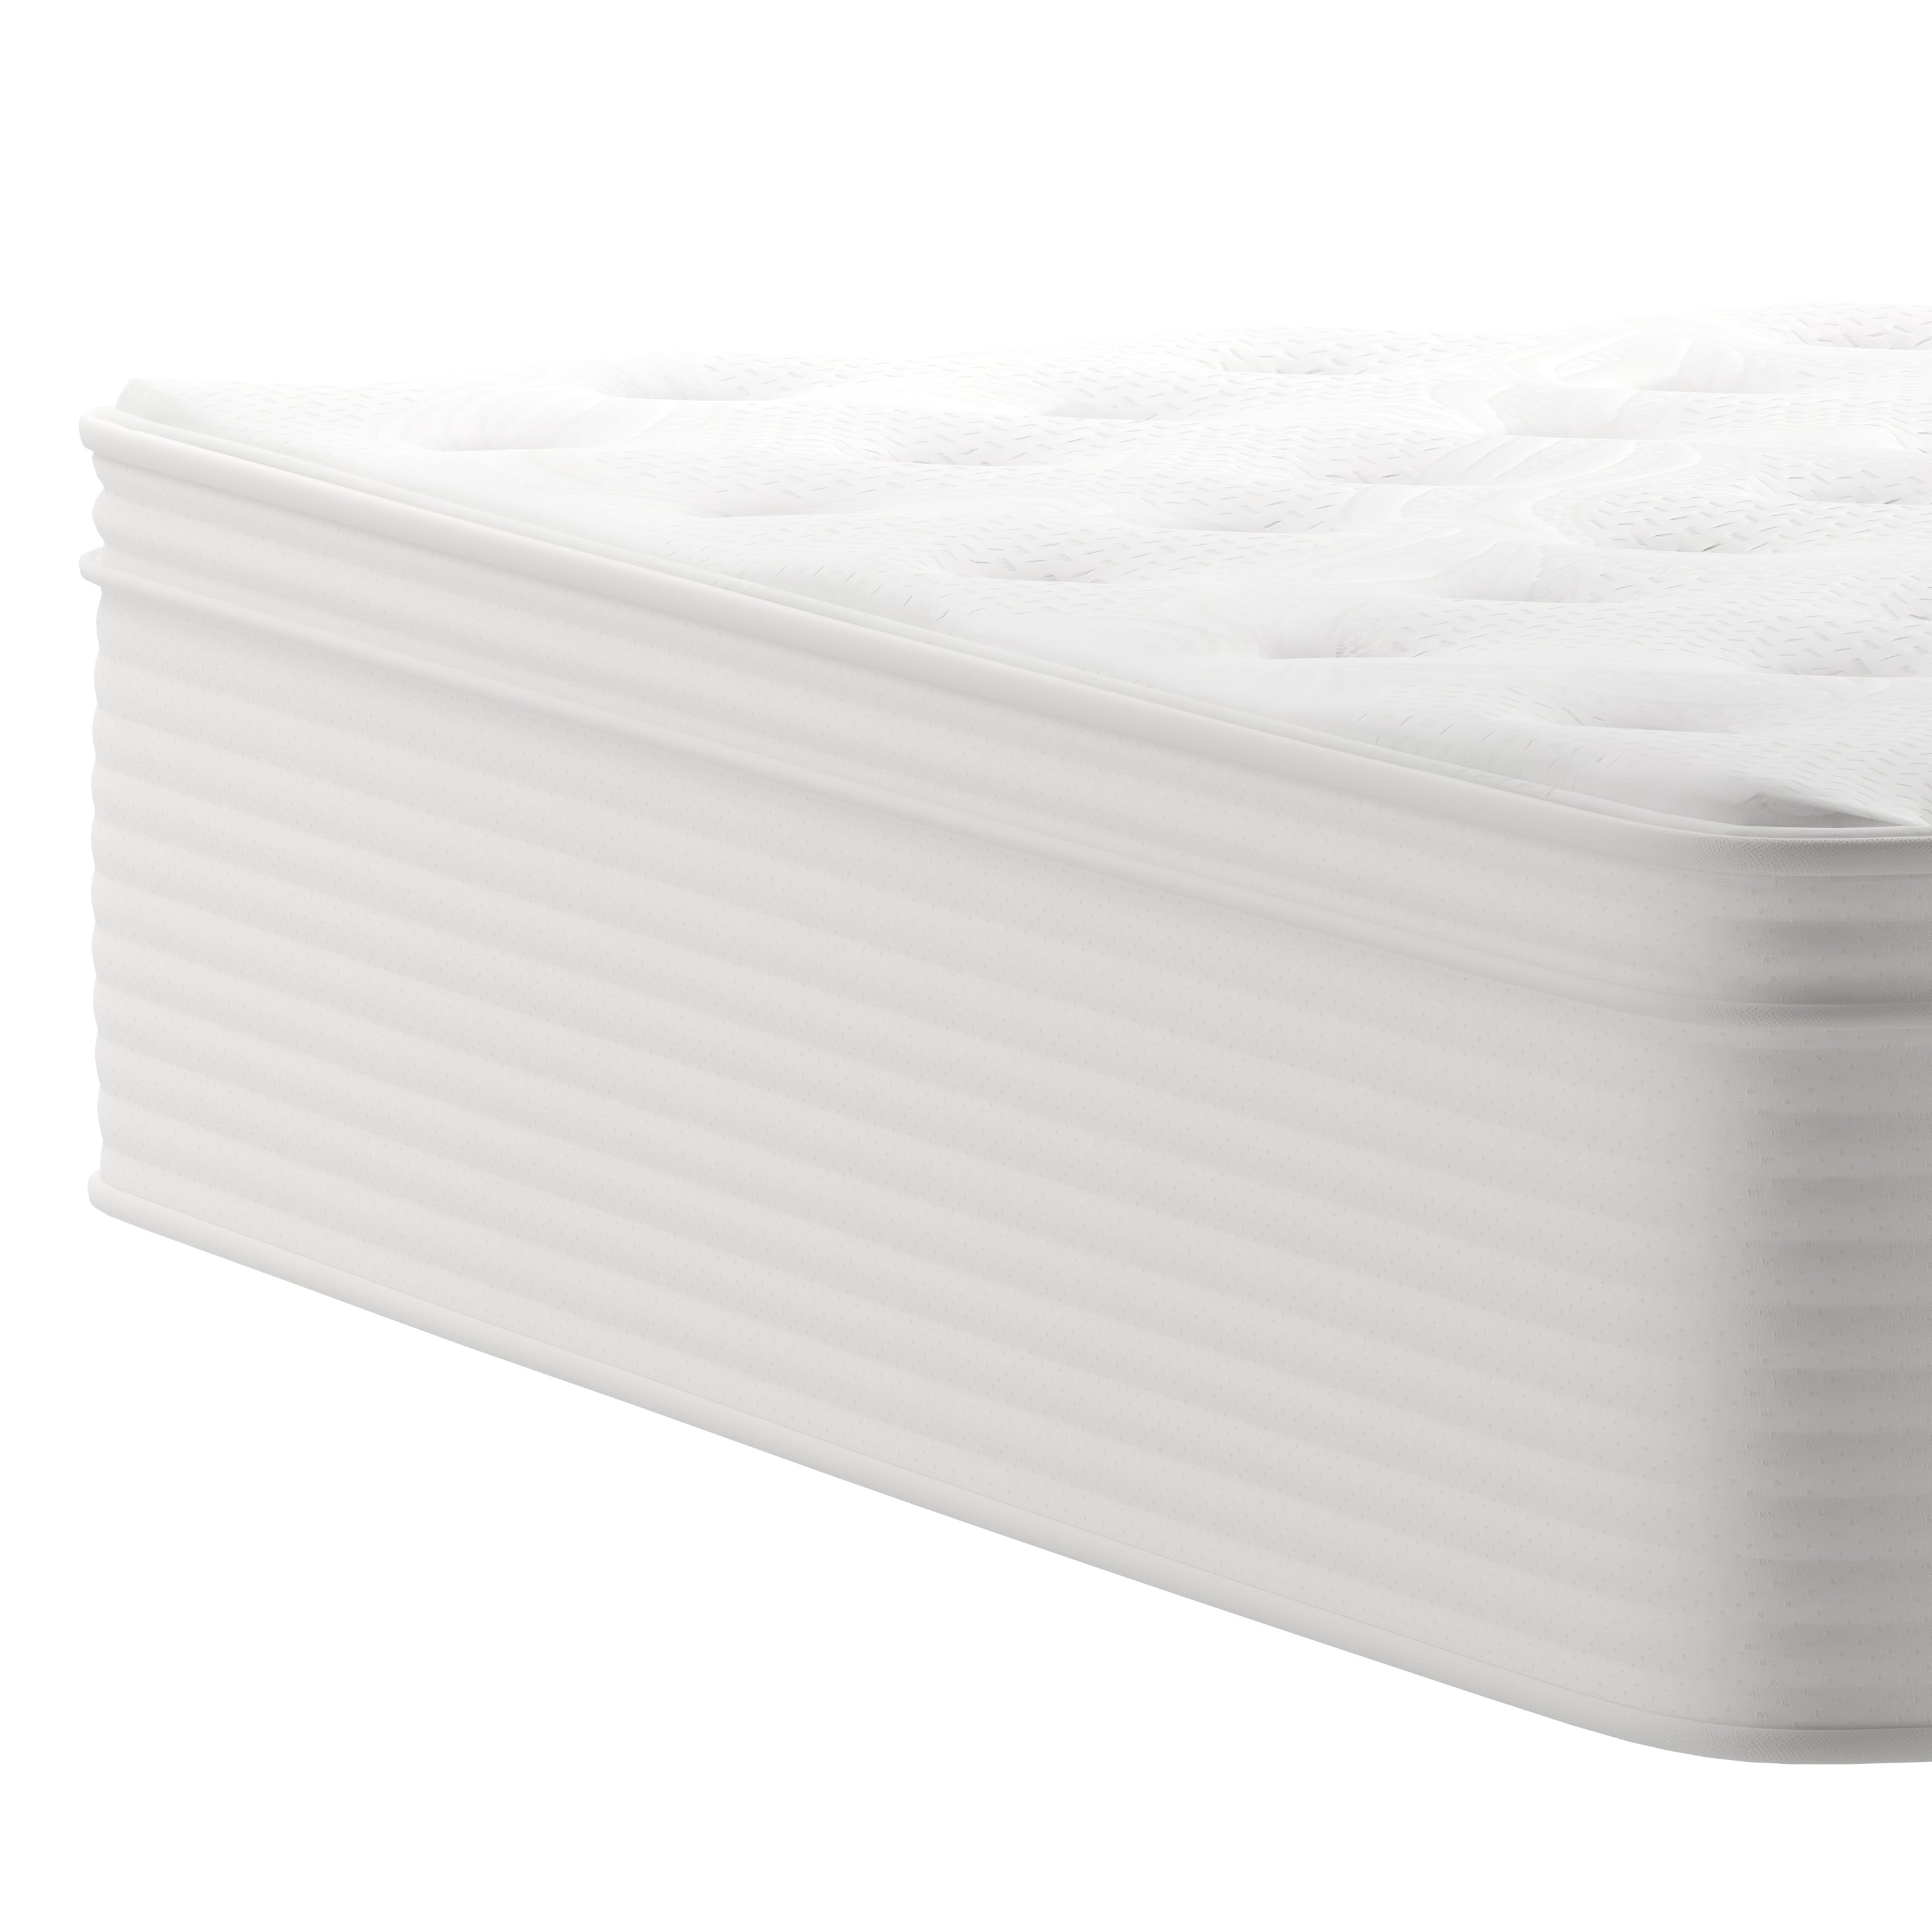 Vista Hospitality Grade Commercial Mattress in a Box 14 Inch, Premium Memory Foam Hybrid Pocket Spring Mattress with Reinforced Edge Support-Mattress-Flash Furniture-Wall2Wall Furnishings